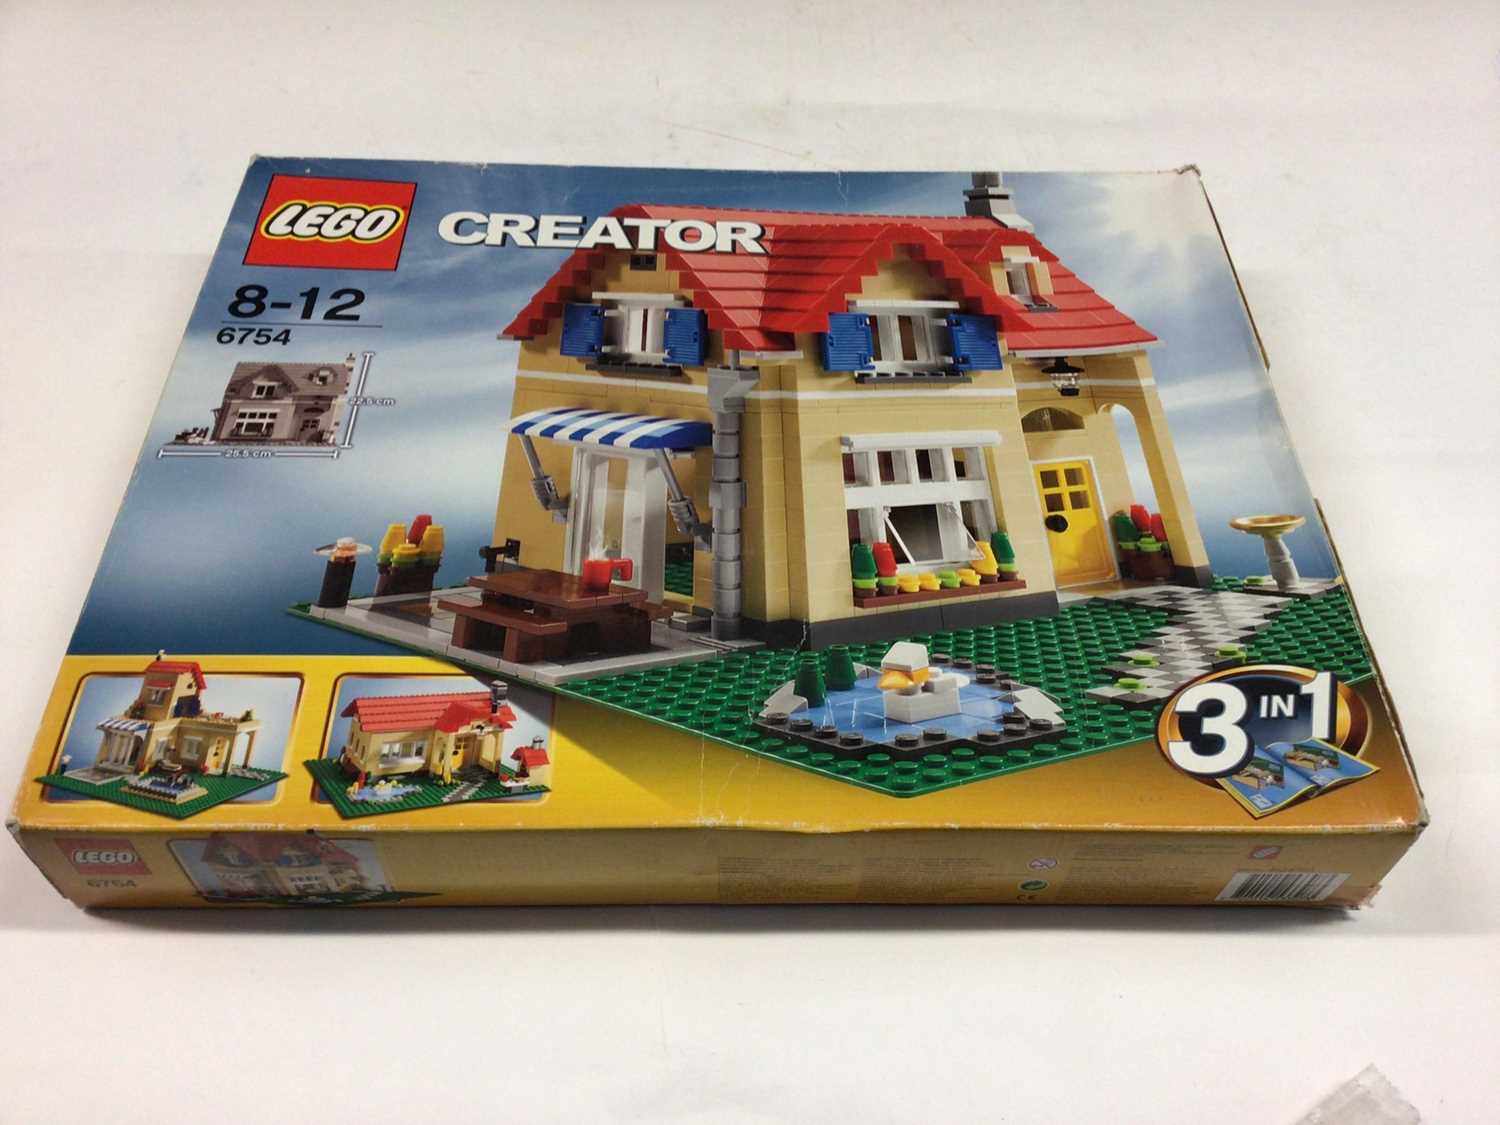 Lot 11 - Lego Creator 6754 Family House 3 in 1, with instructions, Boxed